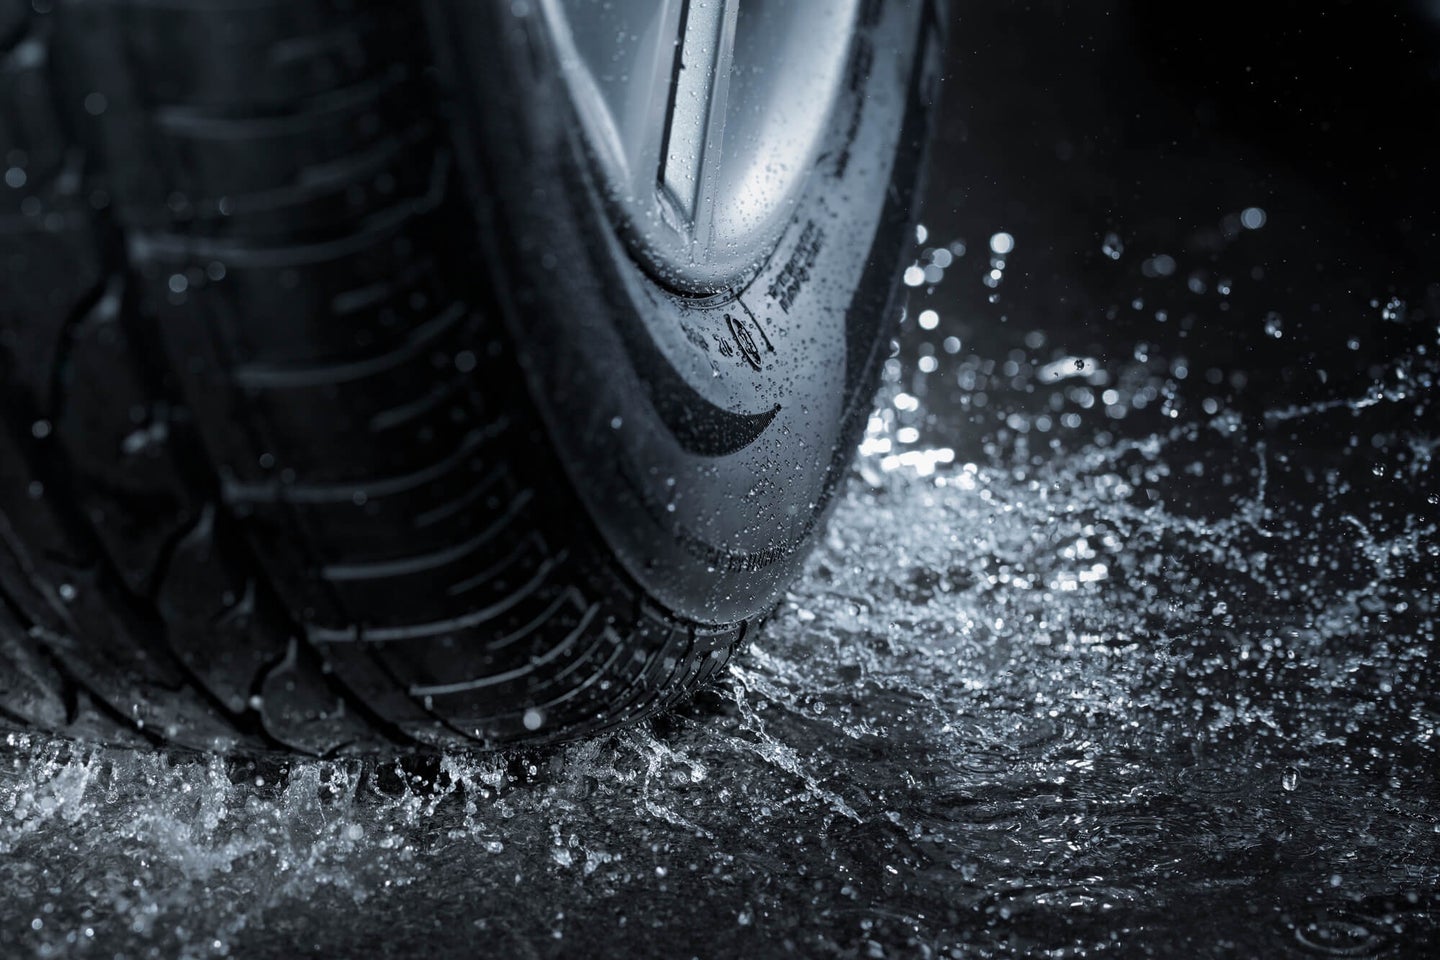 Best Wet Weather Tires: Wheels That Make the Drive Safer in the Rain